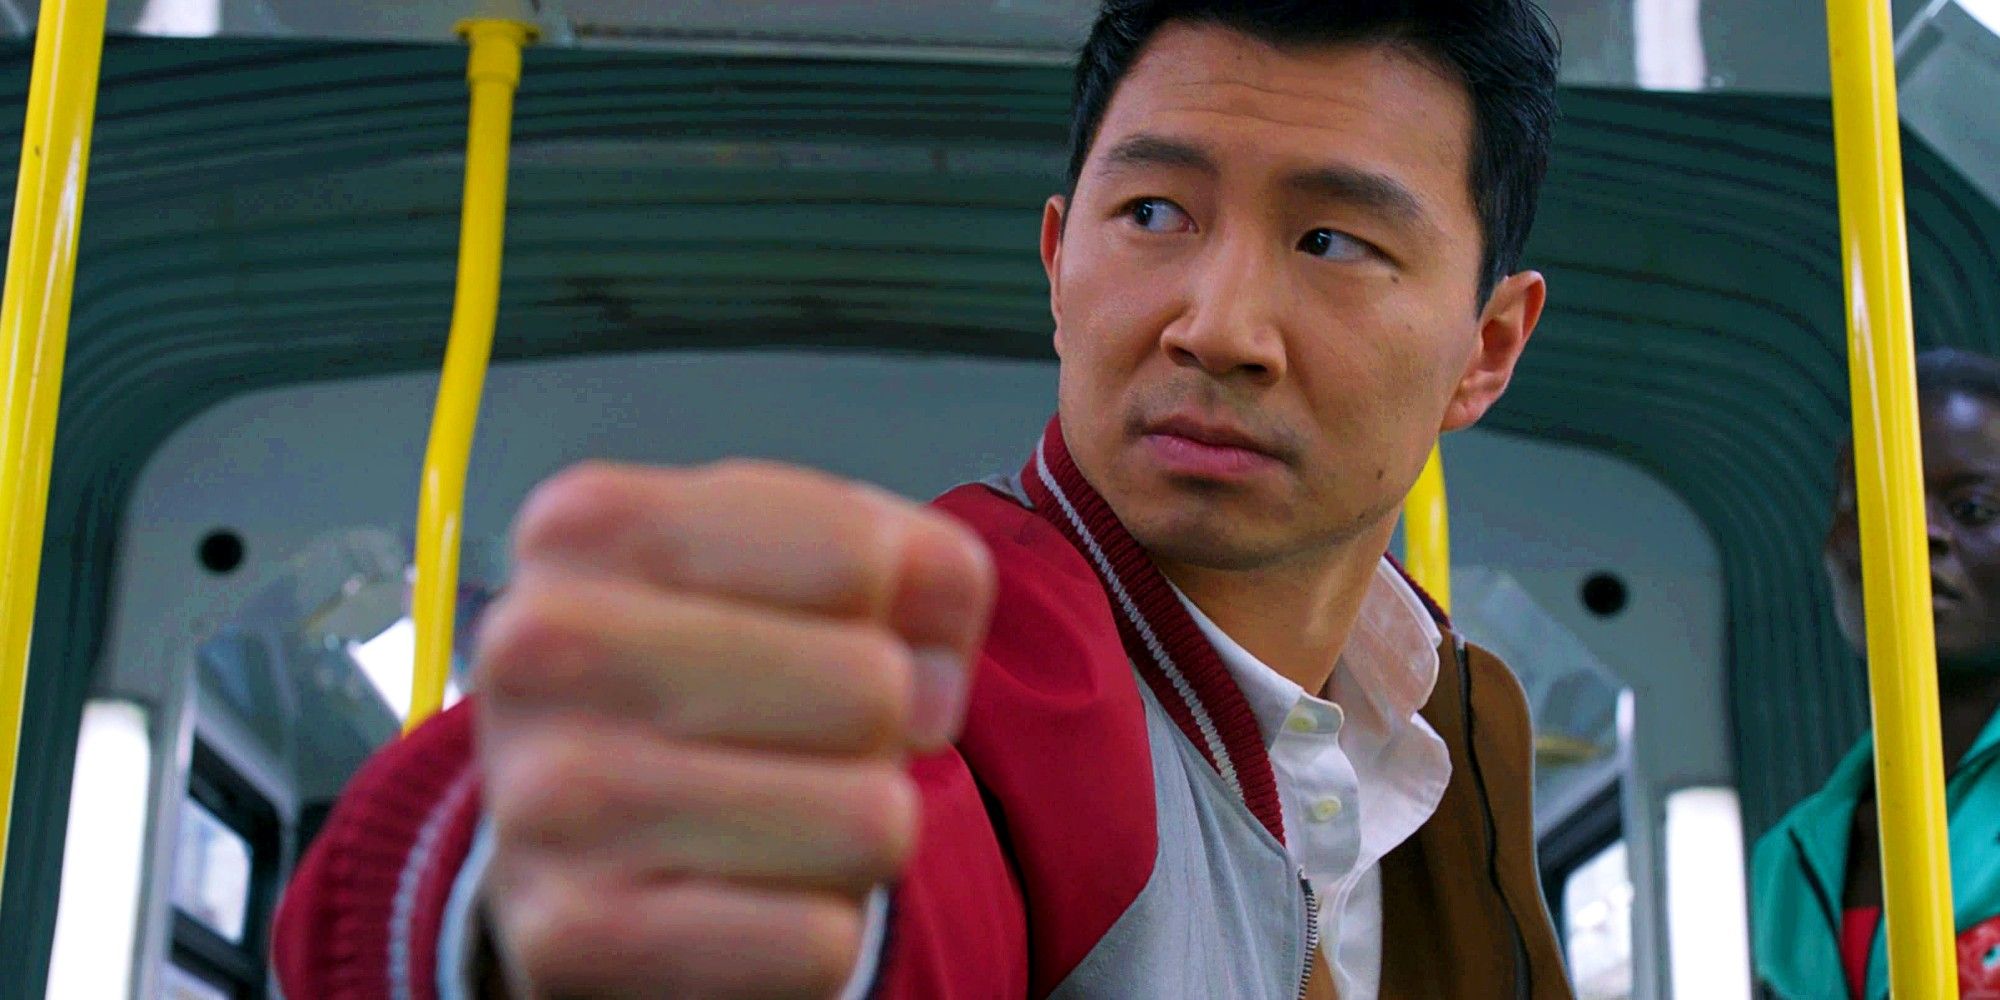 Simu Liu as Shang-Chi With His Fist To The Camera In the Middle Of A Fight On A Bus